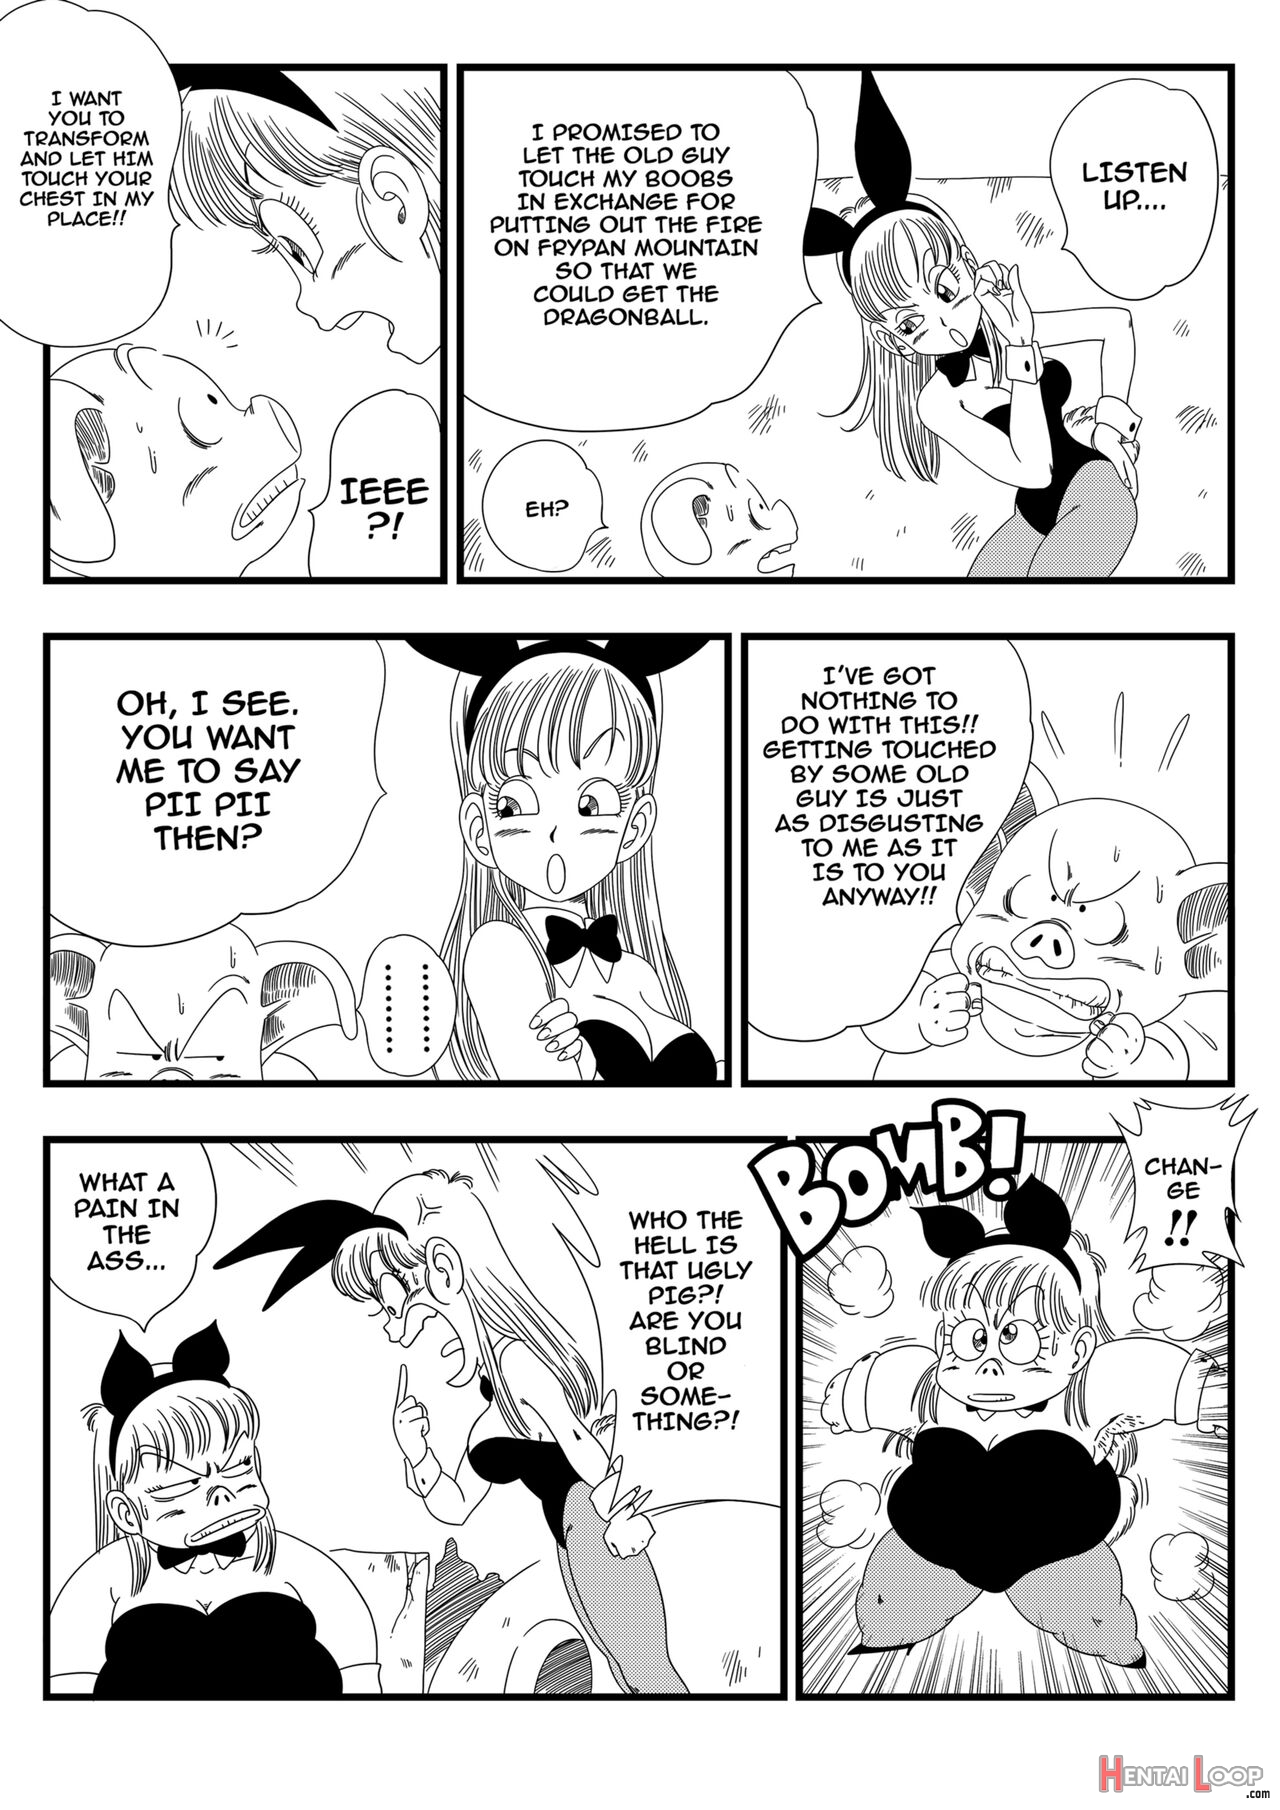 Bunny Girl Transformation page 4